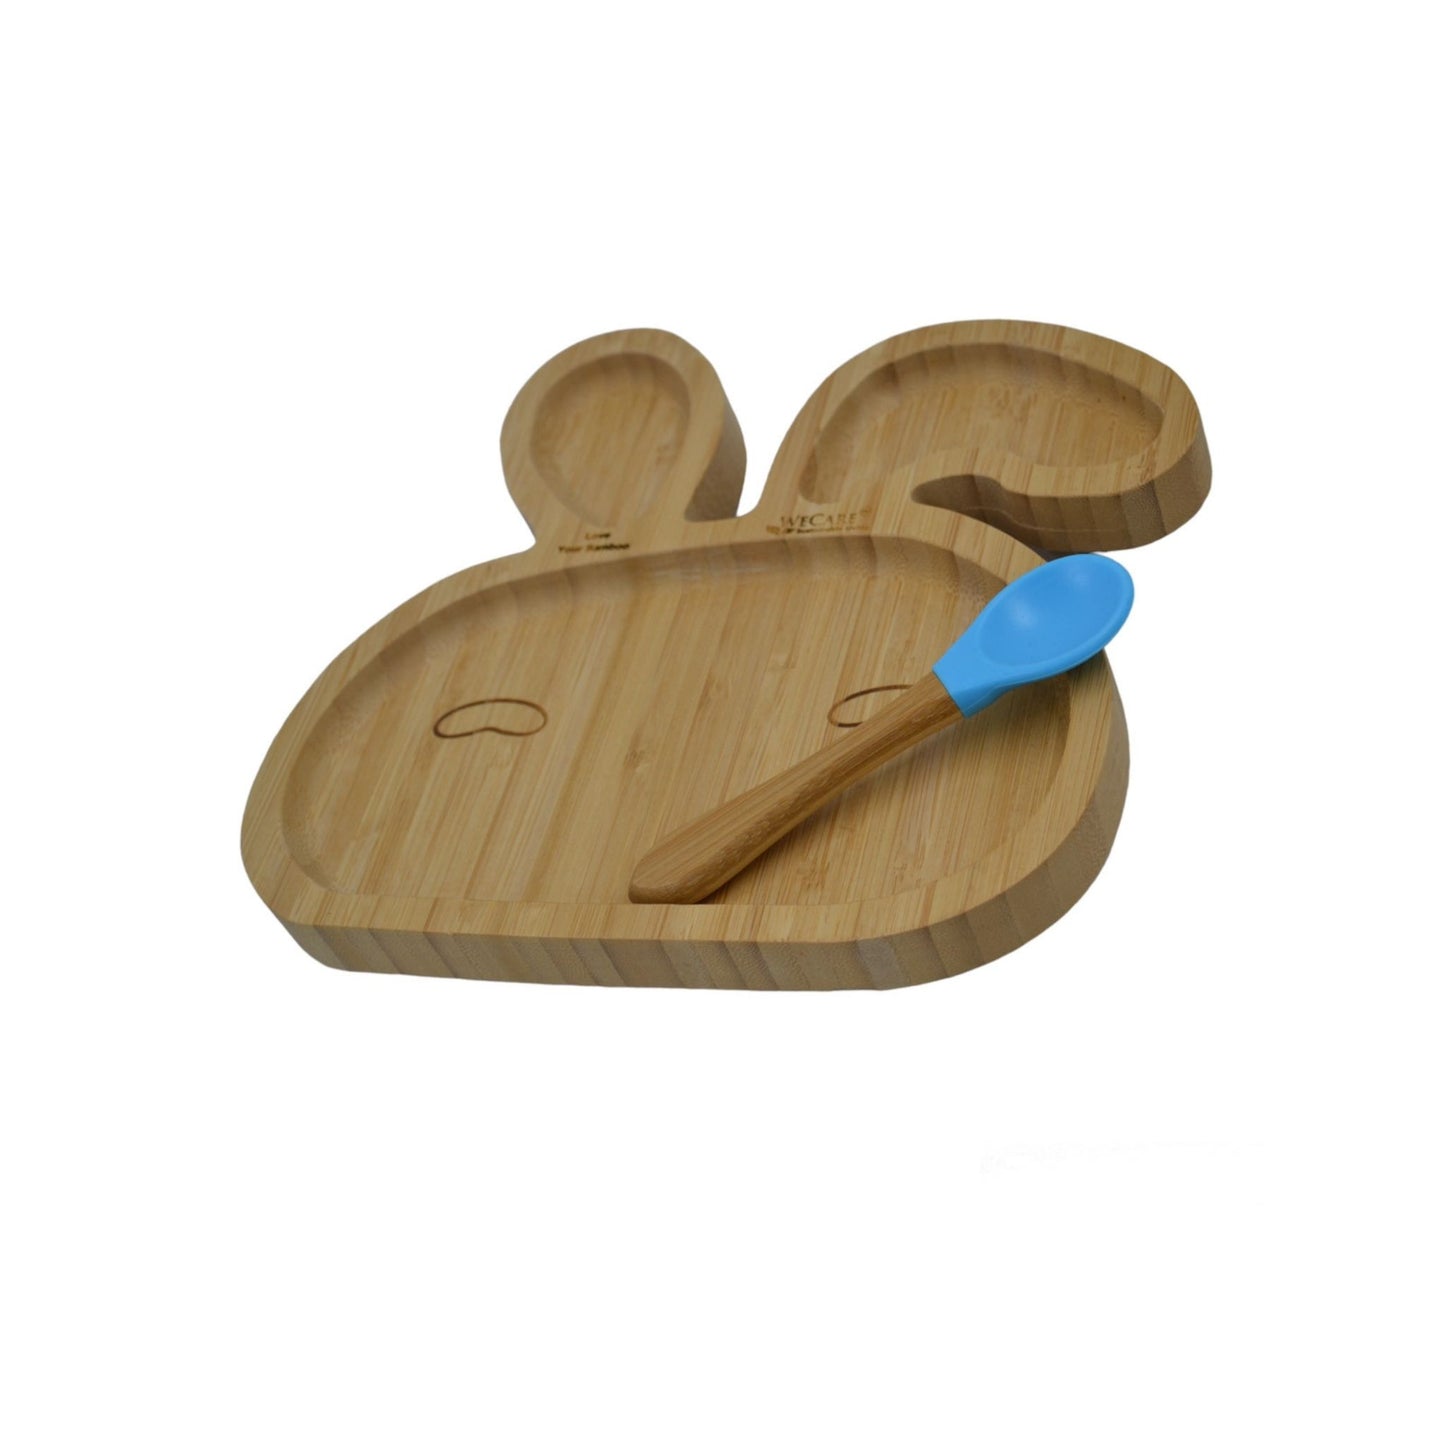 Bamboo Plate with Spoon on top Bunny